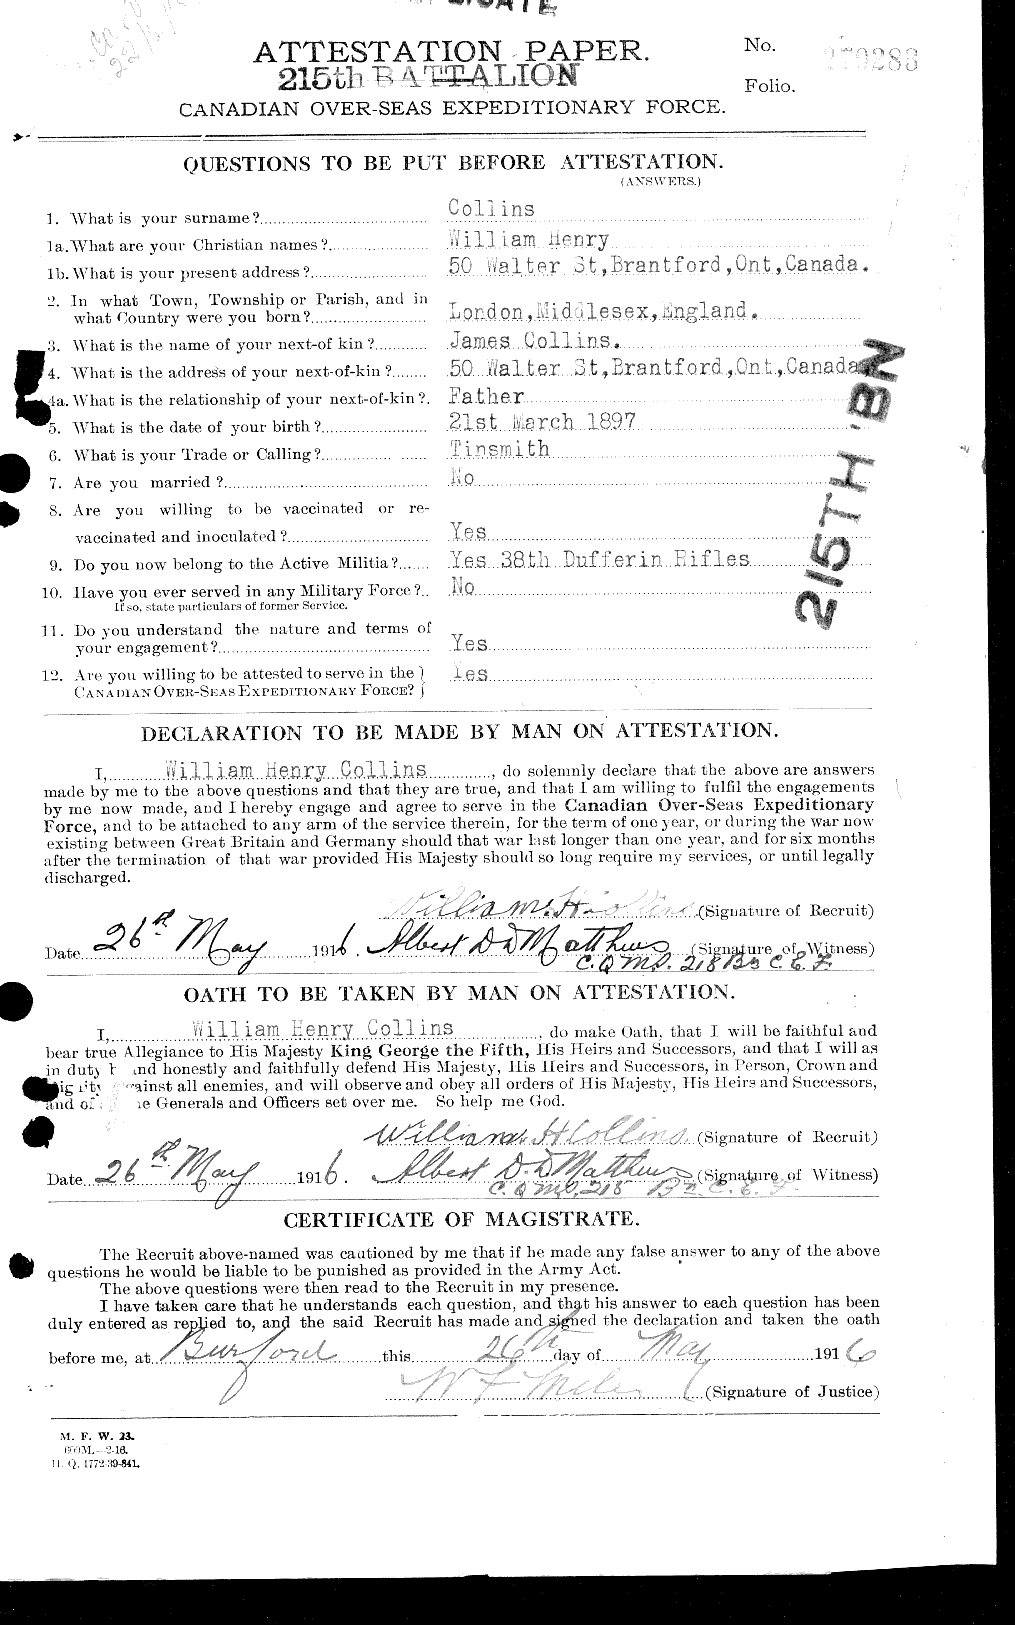 Personnel Records of the First World War - CEF 034611a